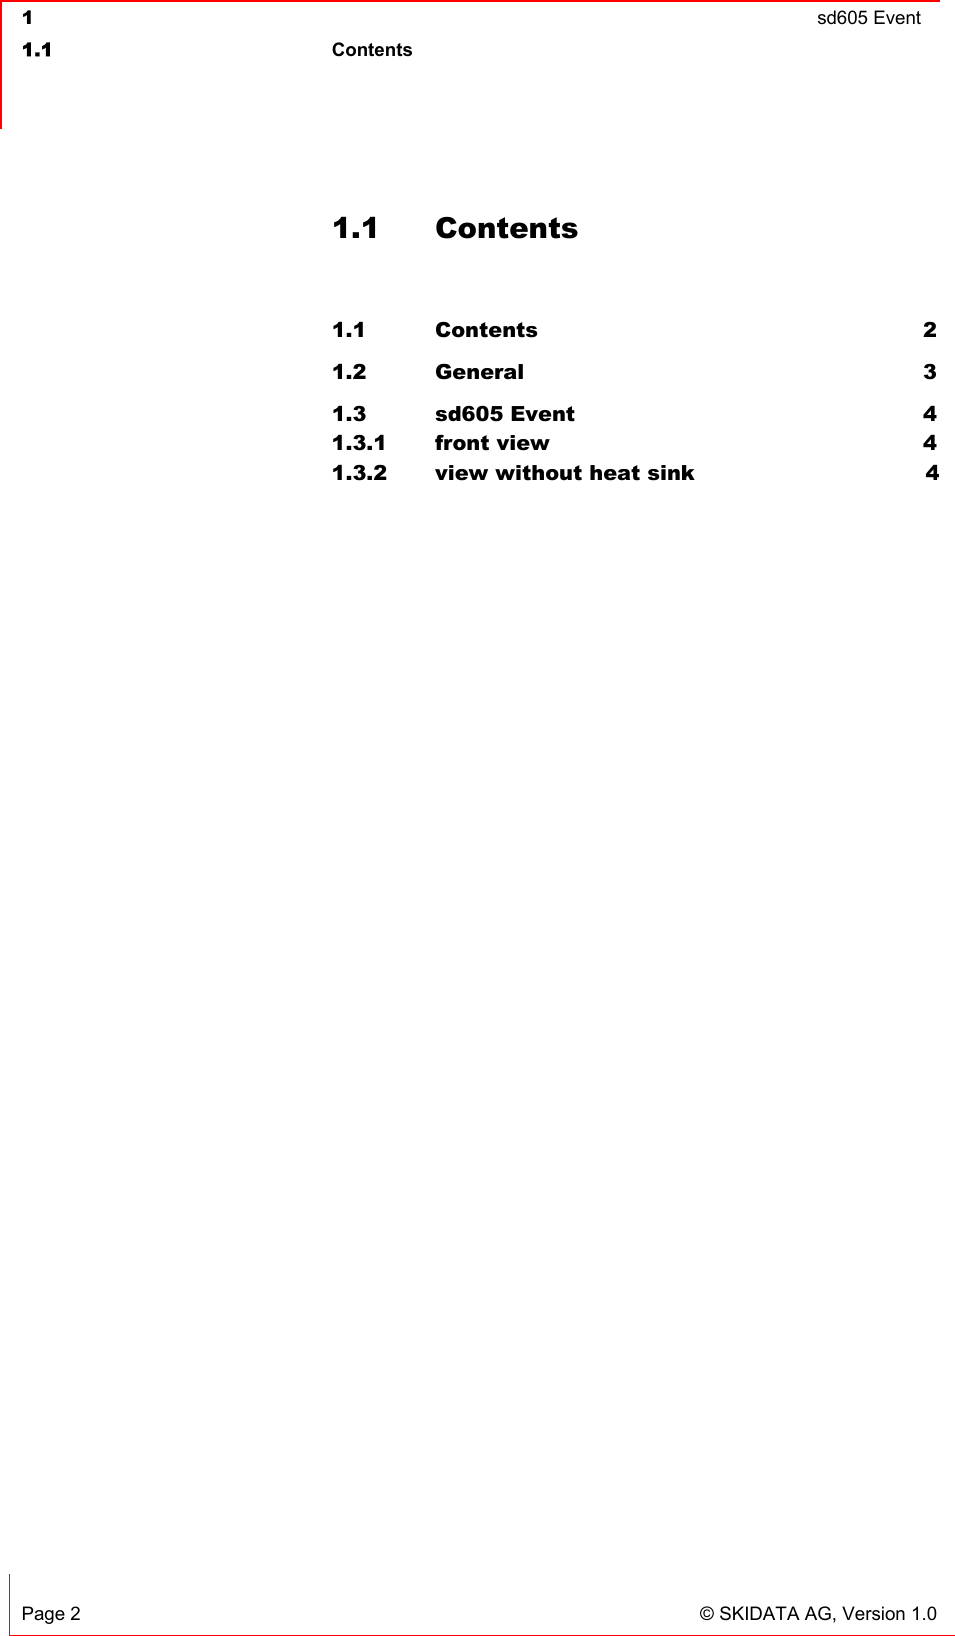  1  sd605 Event  1.1 Contents   Page 2  © SKIDATA AG, Version 1.0 1.1 Contents  1.1 Contents 2 1.2 General 3 1.3 sd605 Event  4 1.3.1 front view  4 1.3.2 view without heat sink                                 4  